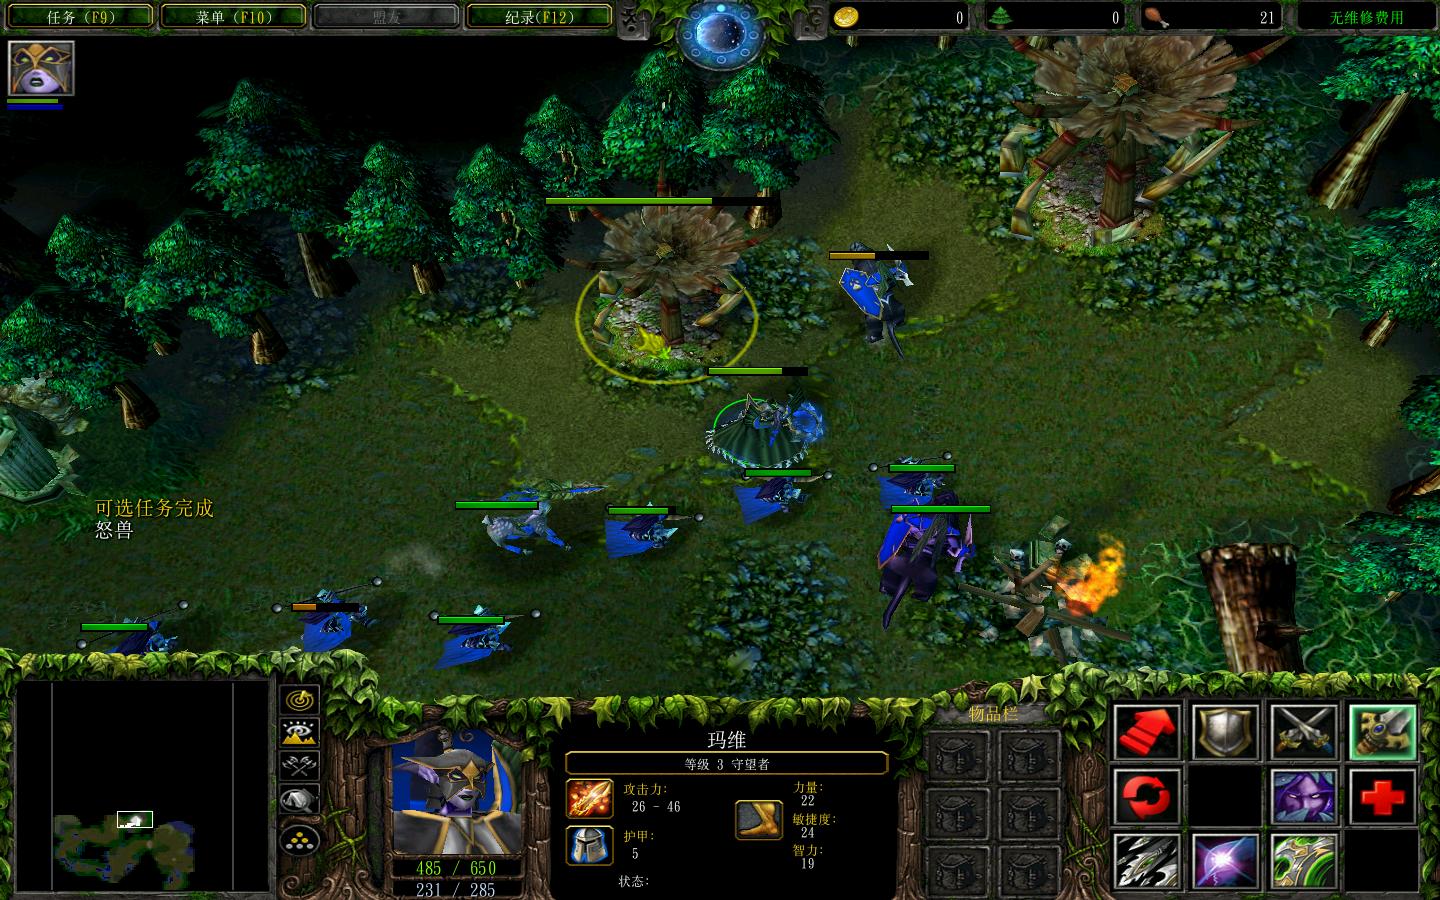 ħ3Warcraft III The Frozen Thronev1.24Ԫv1.24